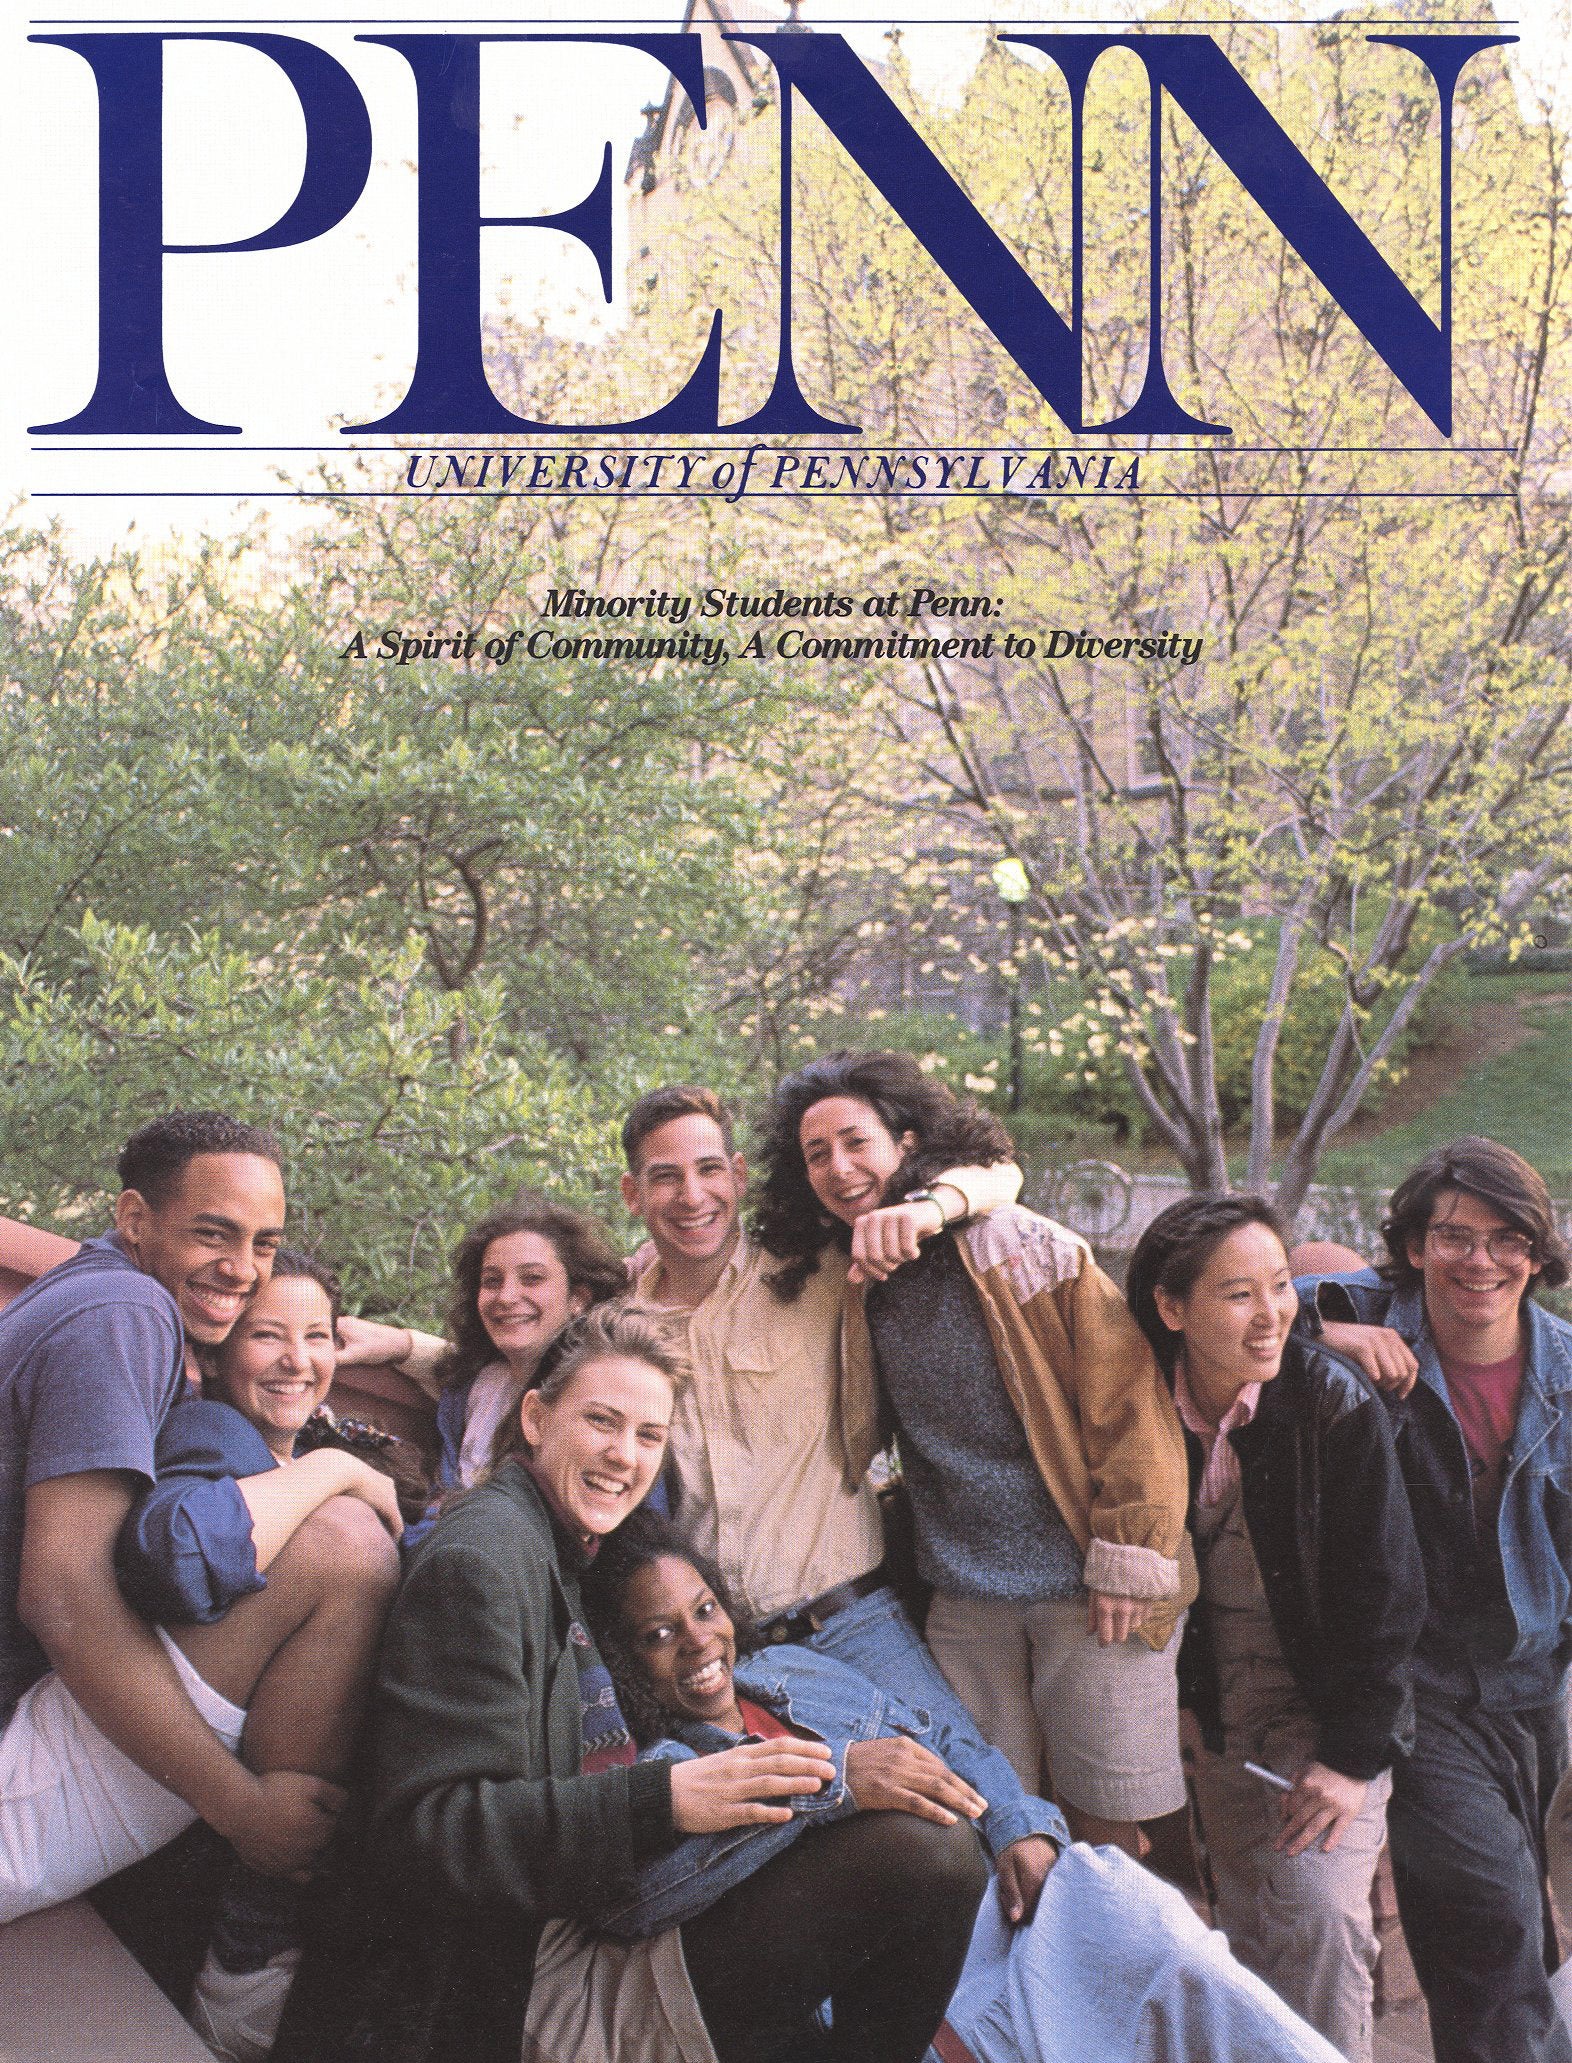 "Minority students at Penn," brochure cover, 1989